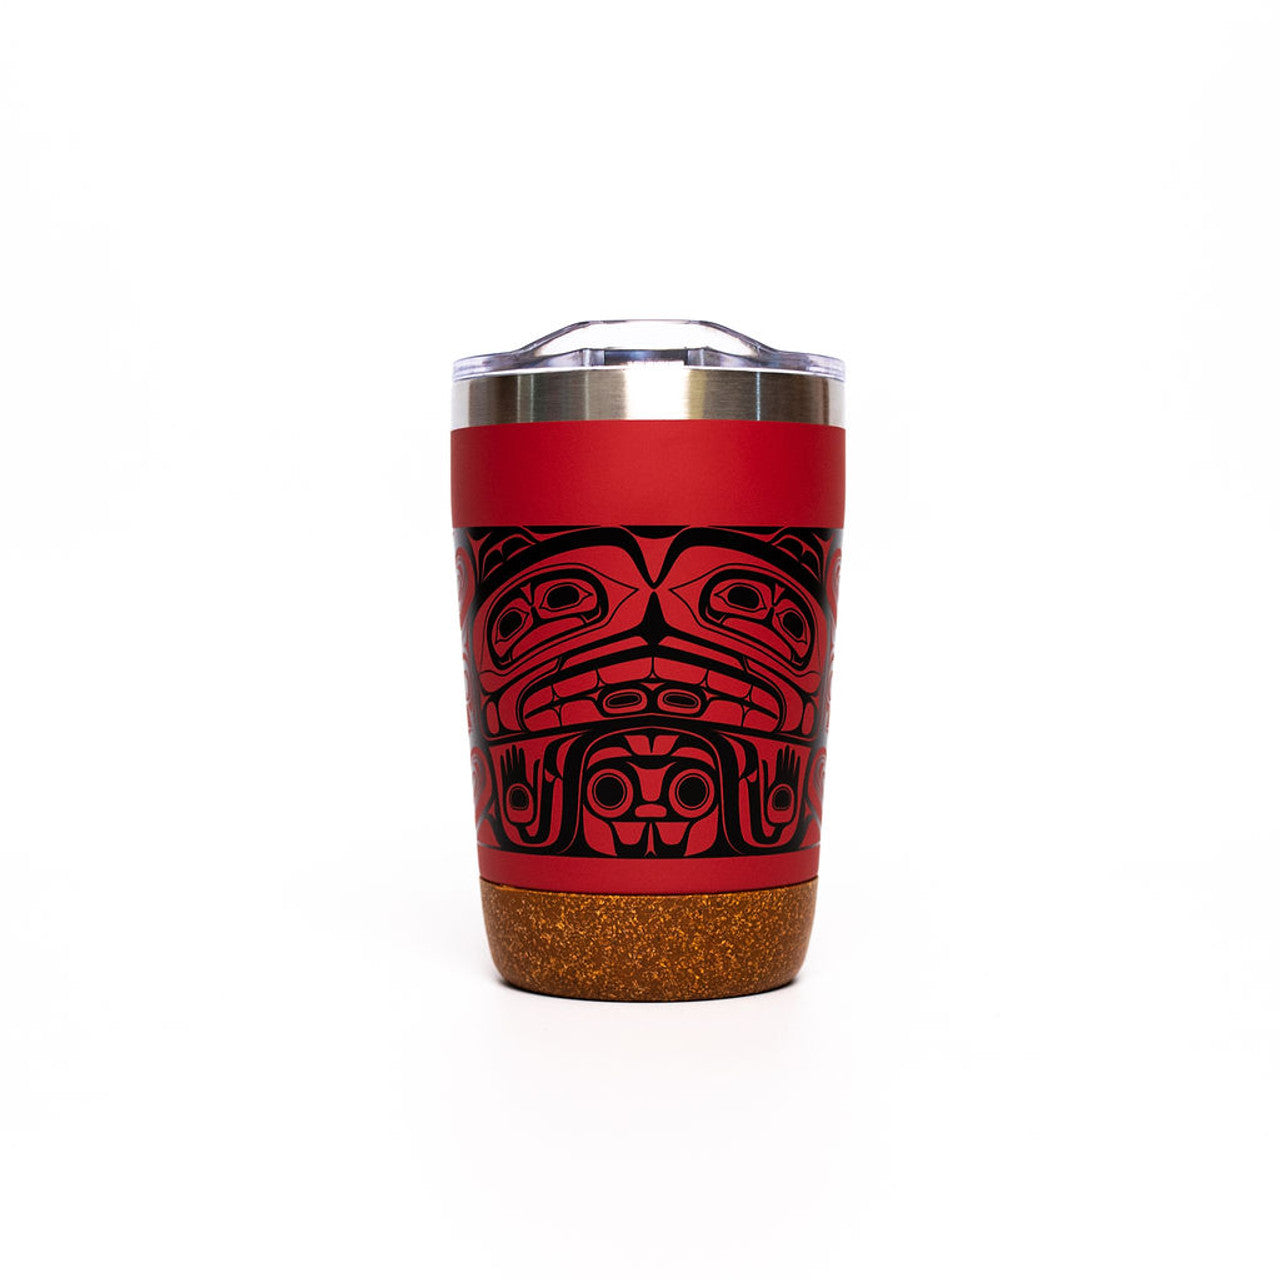 CORK BASE TRAVEL MUGS - 12oz / Treasure of Our Ancestors - TMCB22 - House of Himwitsa Native Art Gallery and Gifts